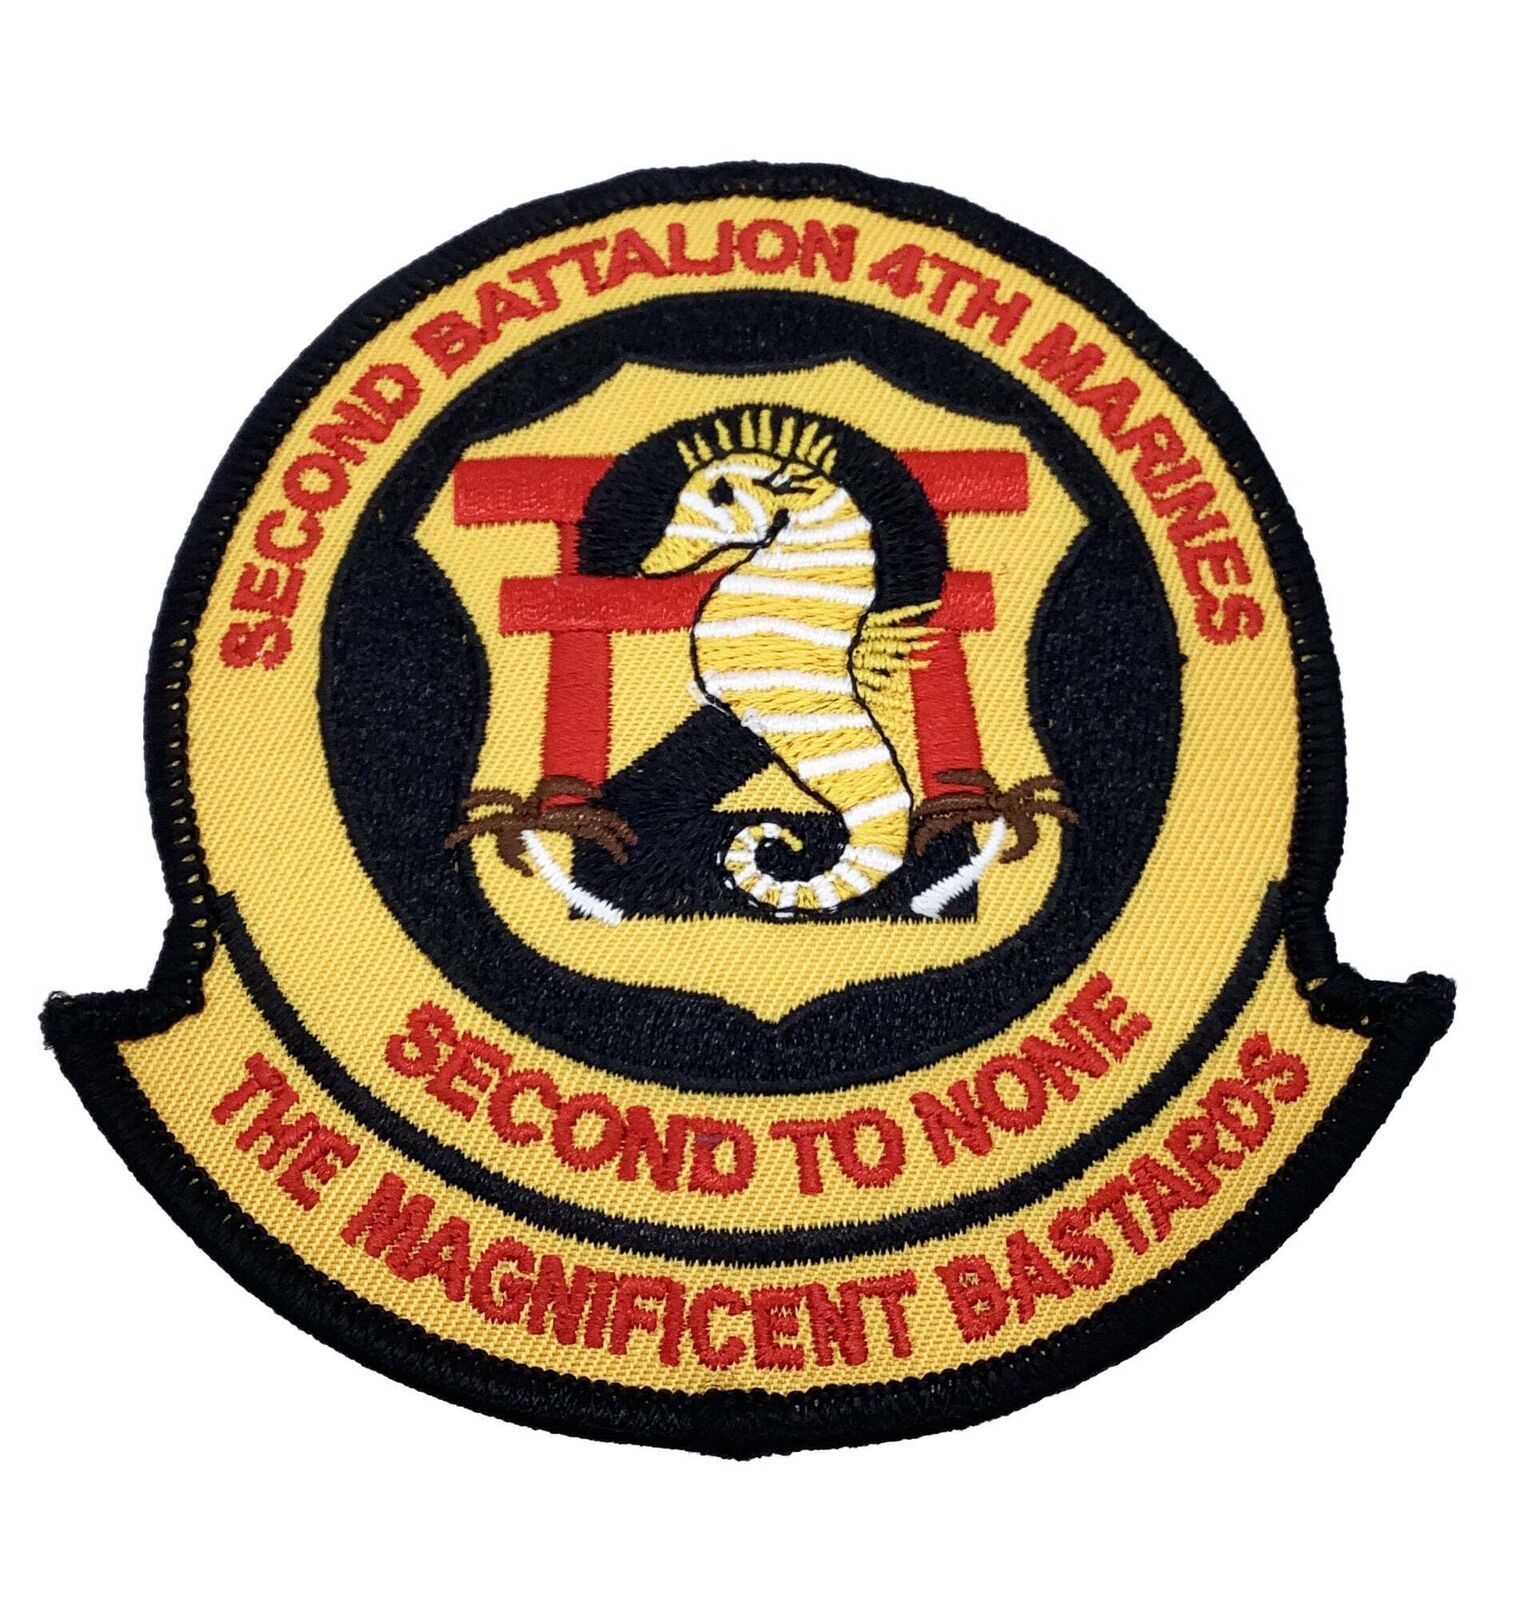 2nd Battalion 4th Marines Magnificent Bastards Patch – Plastic Backing